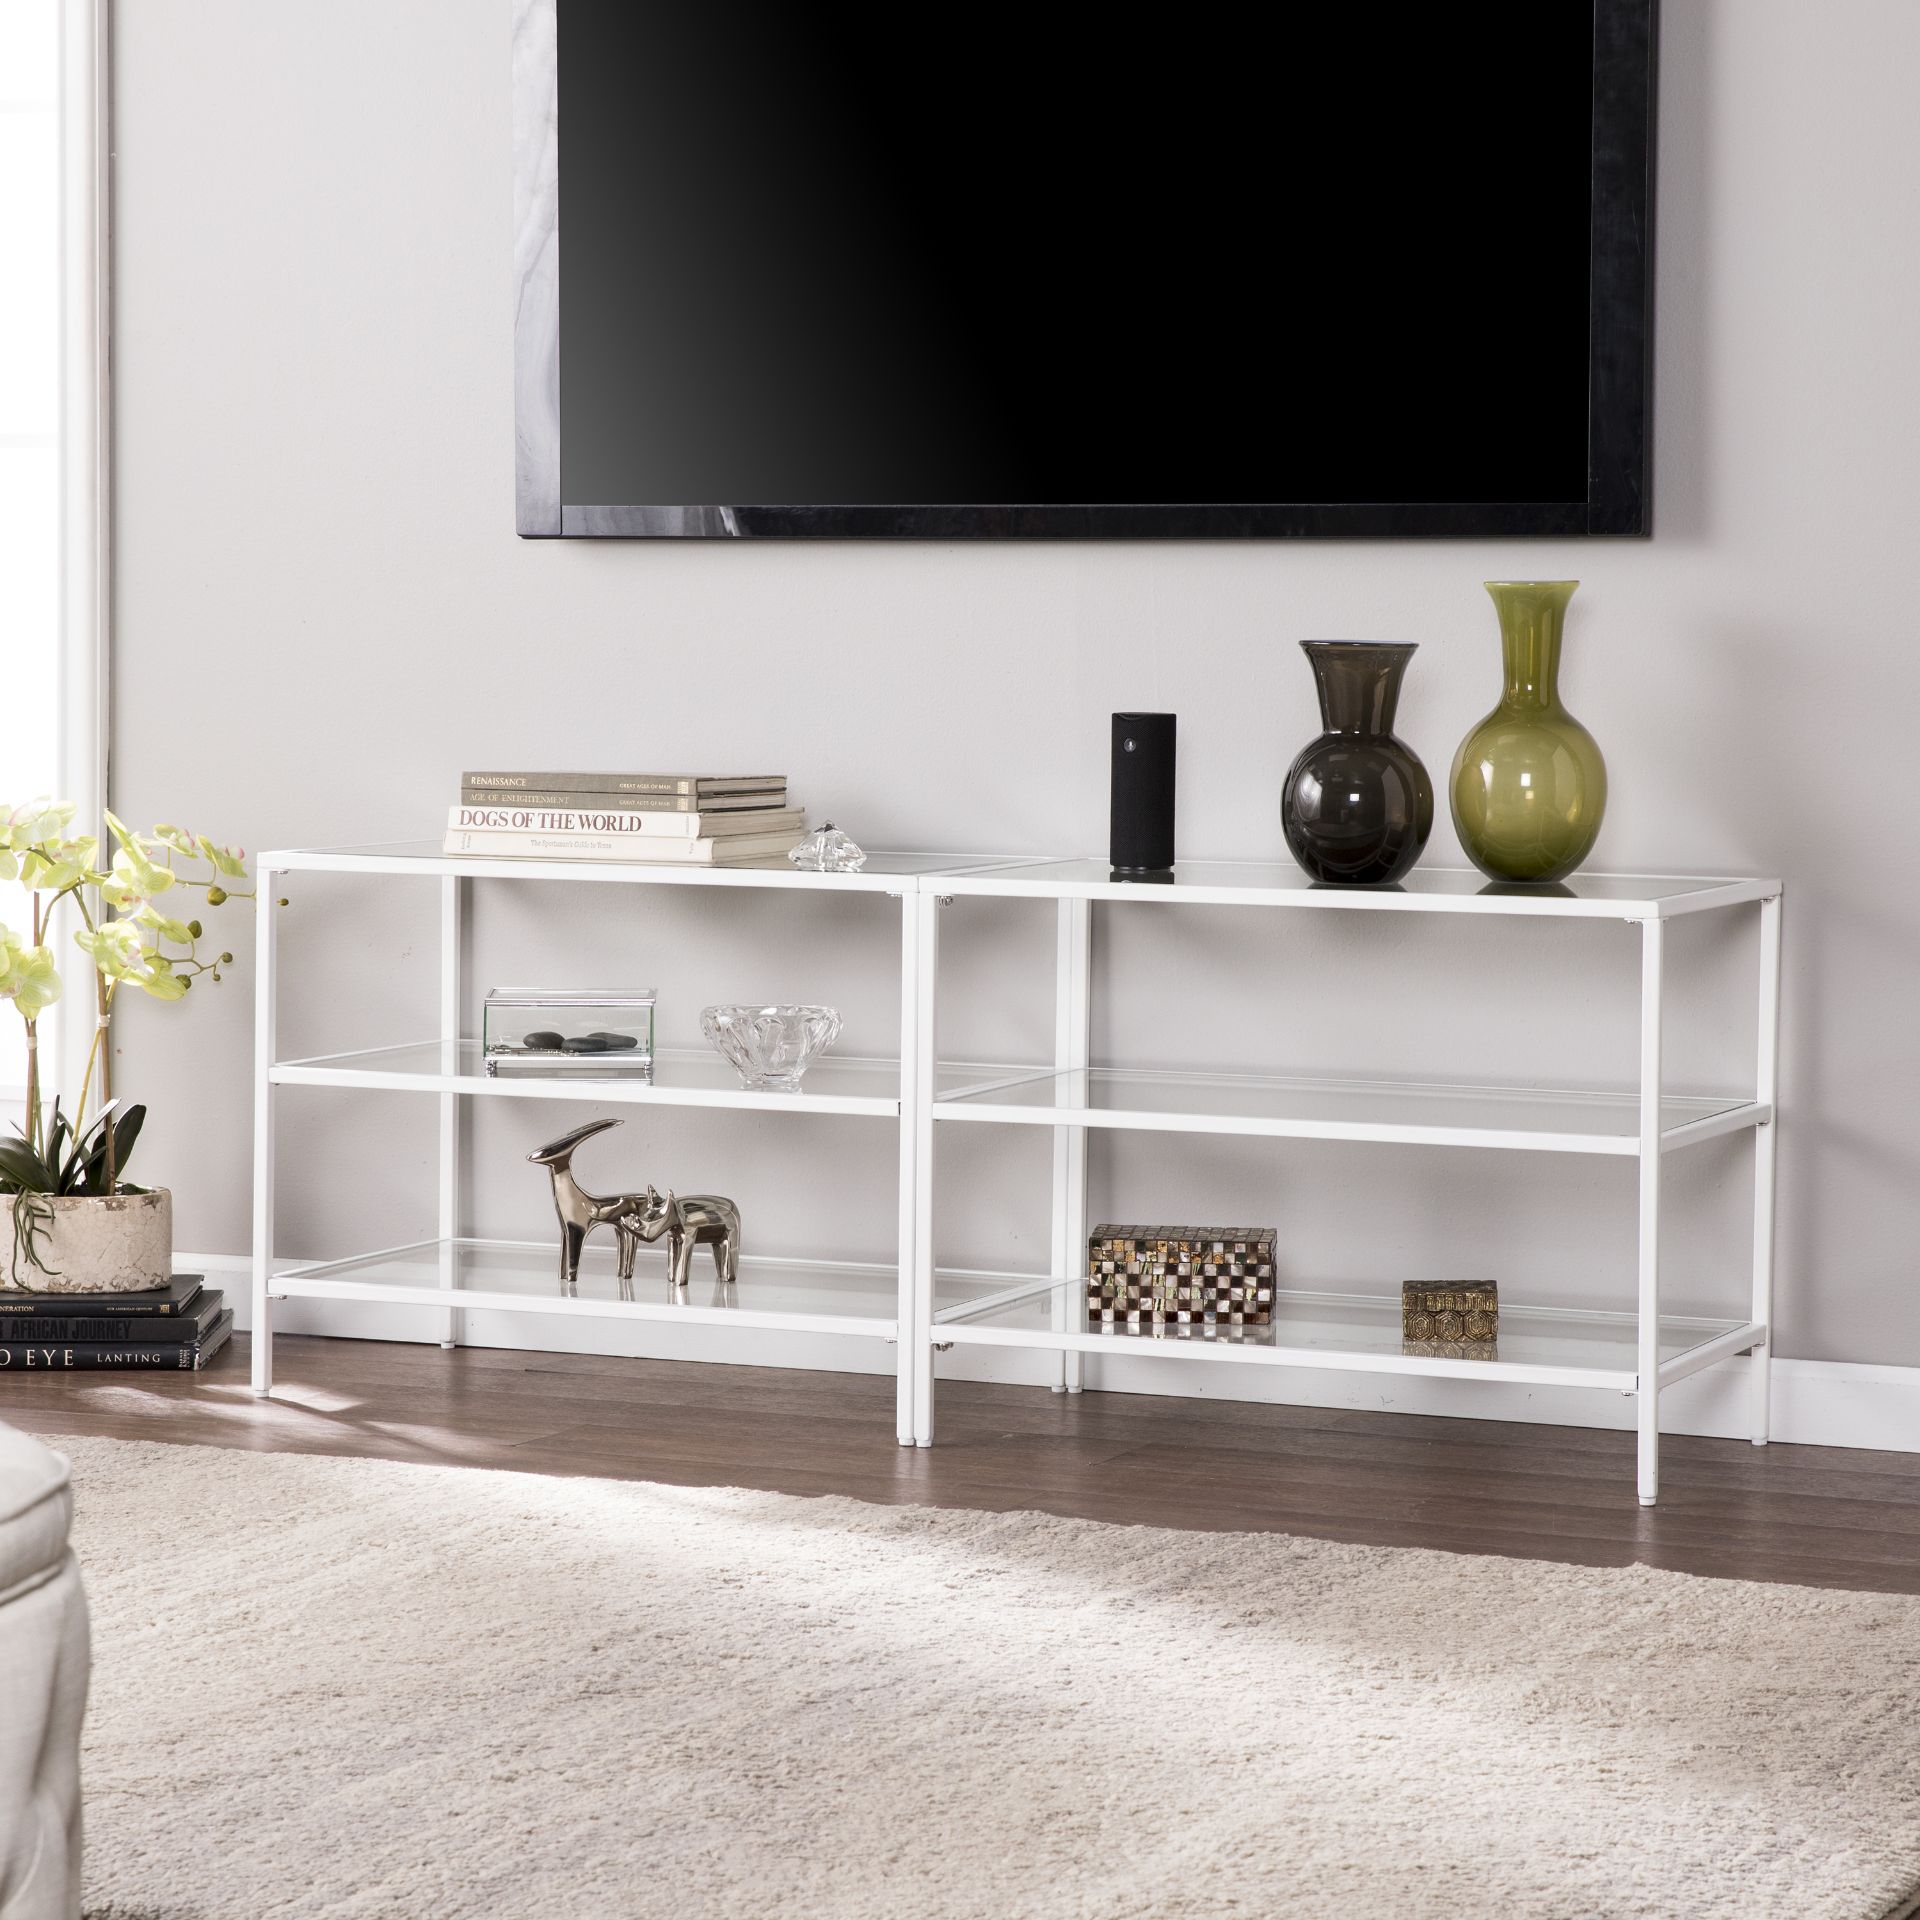 SEI Furniture Bryler Metal and Glass 60" TV Stand, White RRP 261.99 Widen your horizons with this